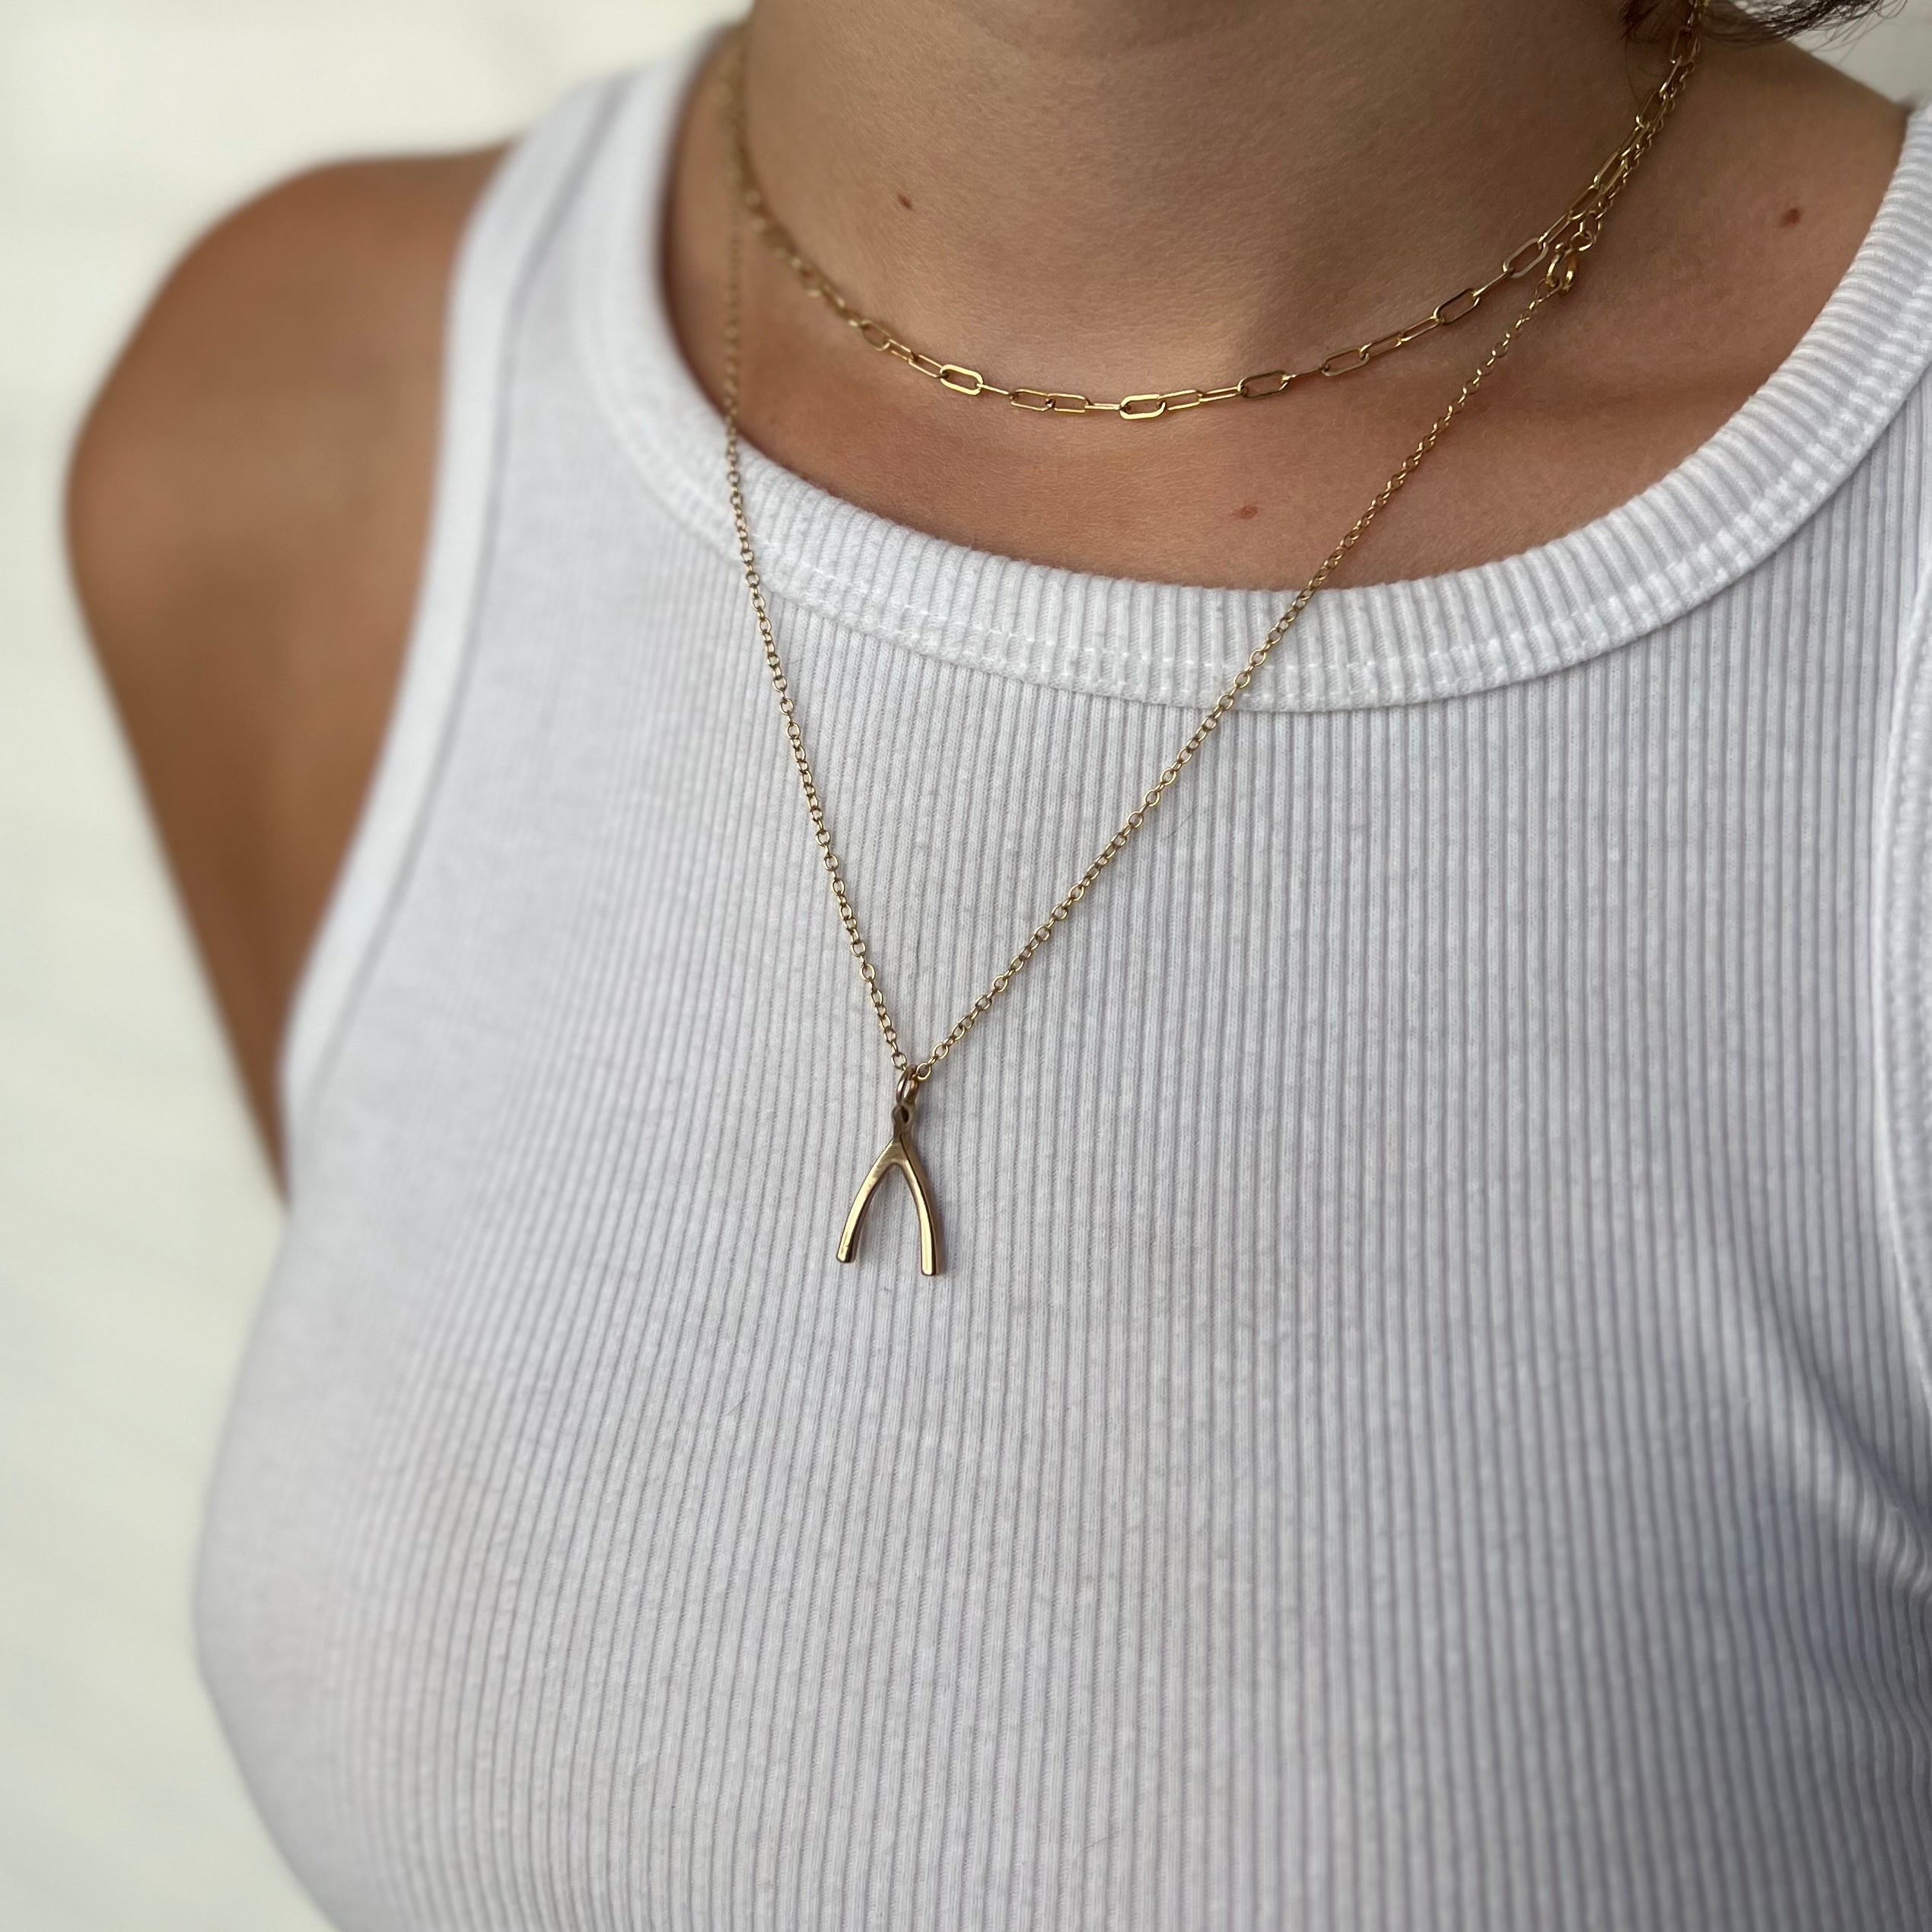 Buy Wishbone Sterling Silver Necklace, Lucky Charm Necklace, Gift for Her, Wishbone  Necklace Gold, Rose Gold Luck Necklace, Make a Wish Silver Online in India  - Etsy